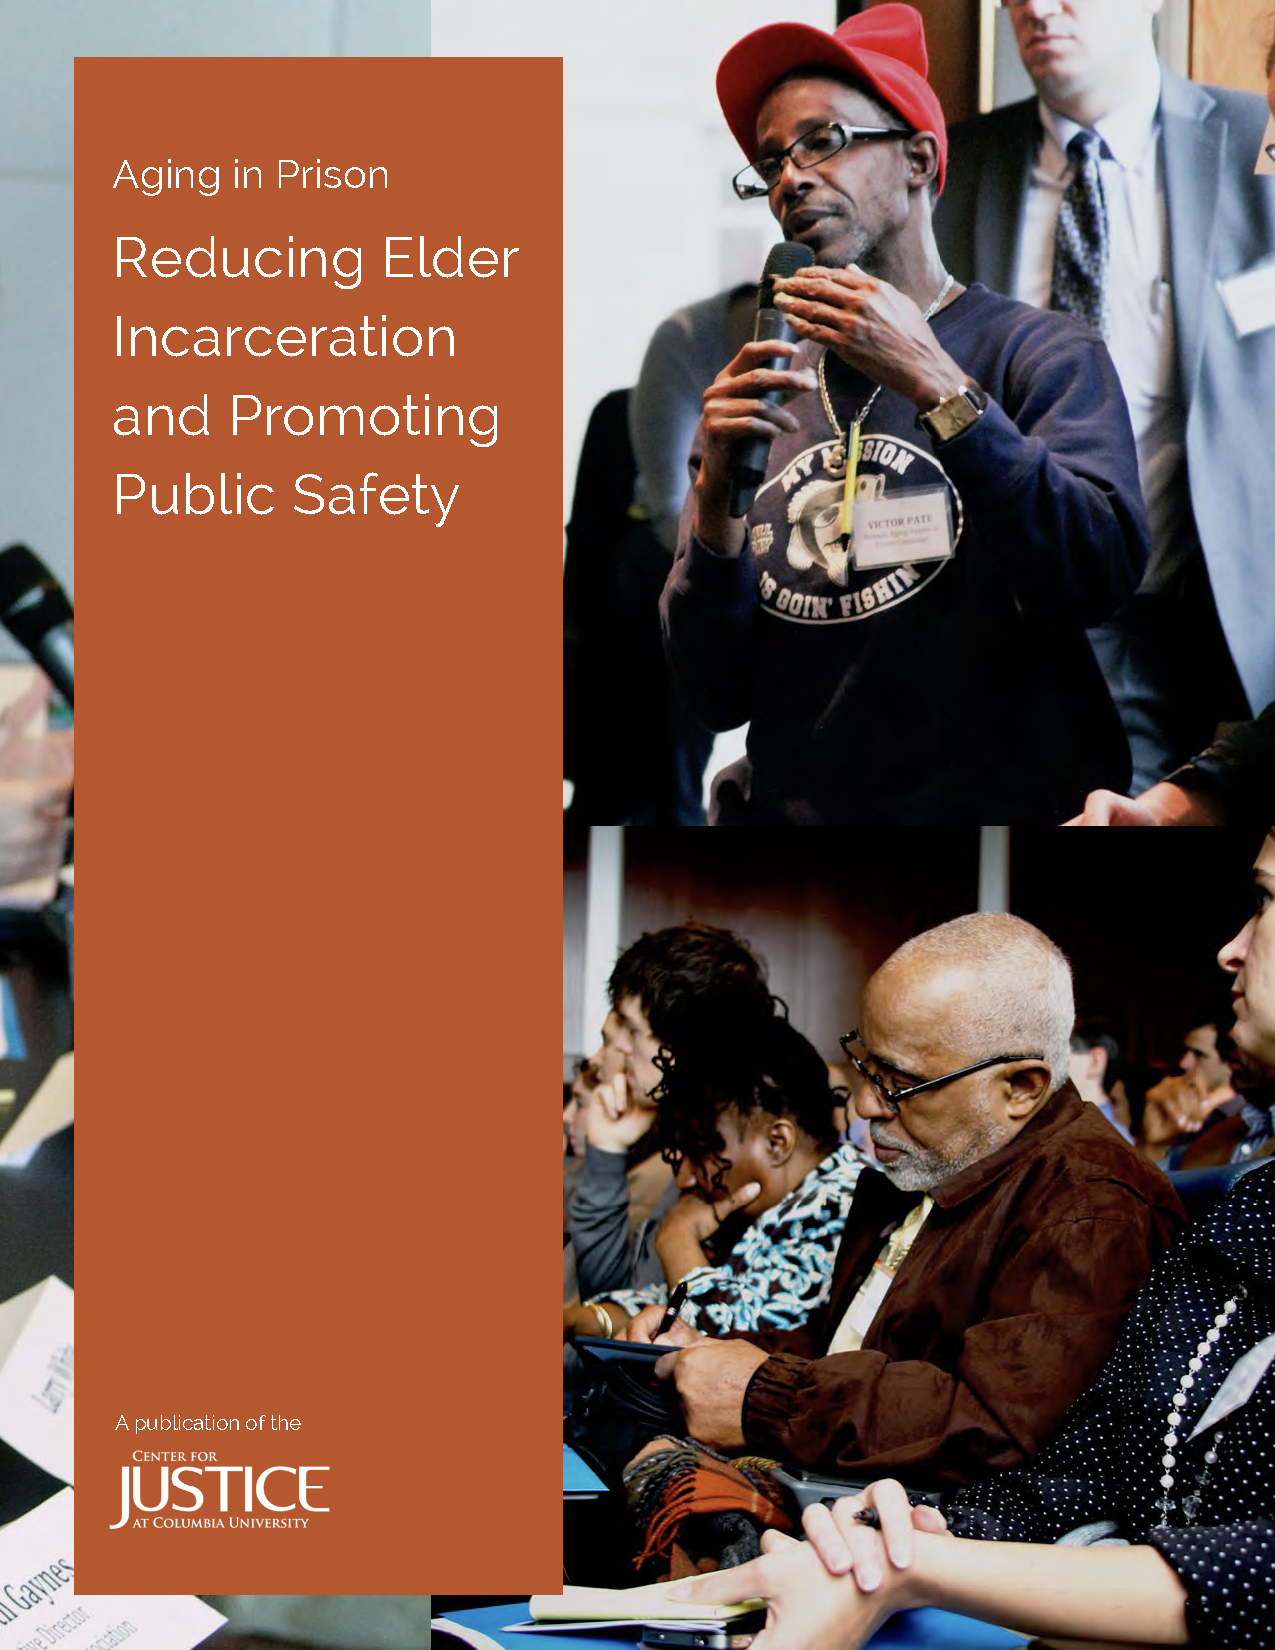 Aging in Prison: Reducing Elder Incarceration and Promoting Public Safety